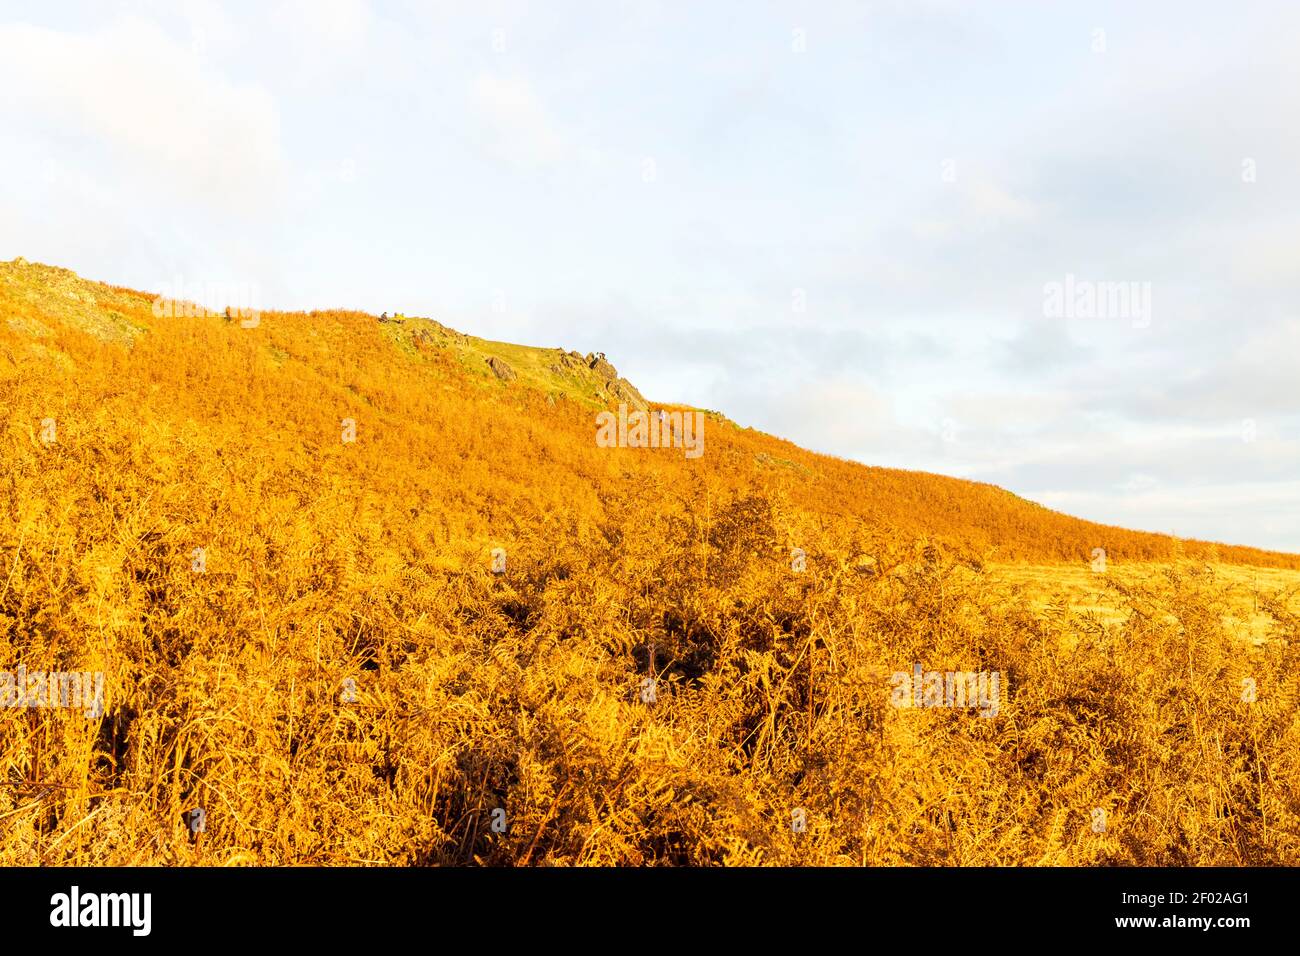 Large landscape grassy area, with a hill in the background. Blue and mars-like brown and orange colours. Stock Photo